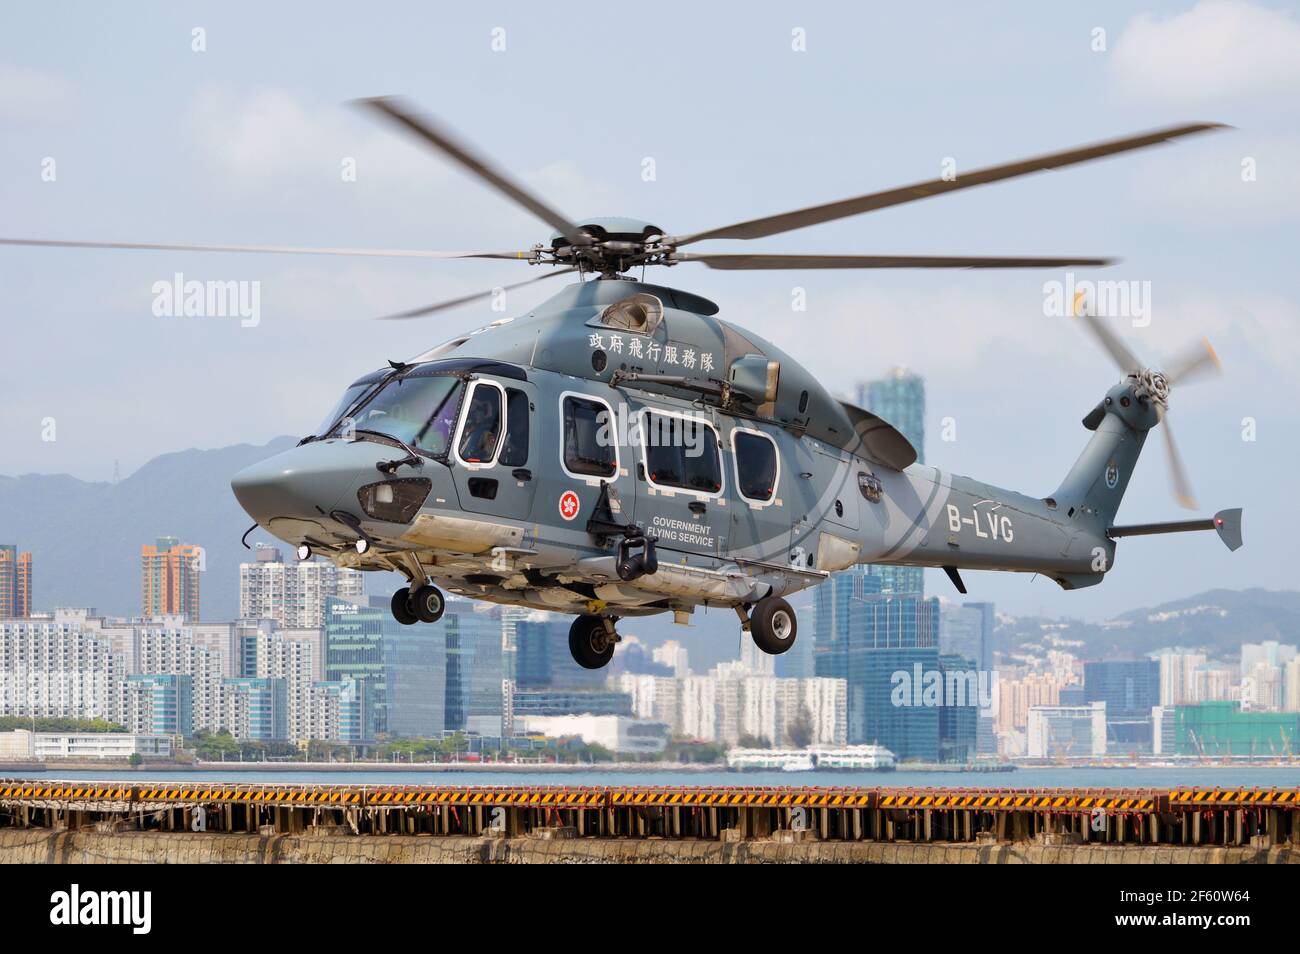 Airbus Helicopters H175 helicopter (registration B-LVG) of the Government Flying Service (政府飛行服務隊) at Wan Chai Heliport (灣仔直升機坪) in Hong Kong. Stock Photo